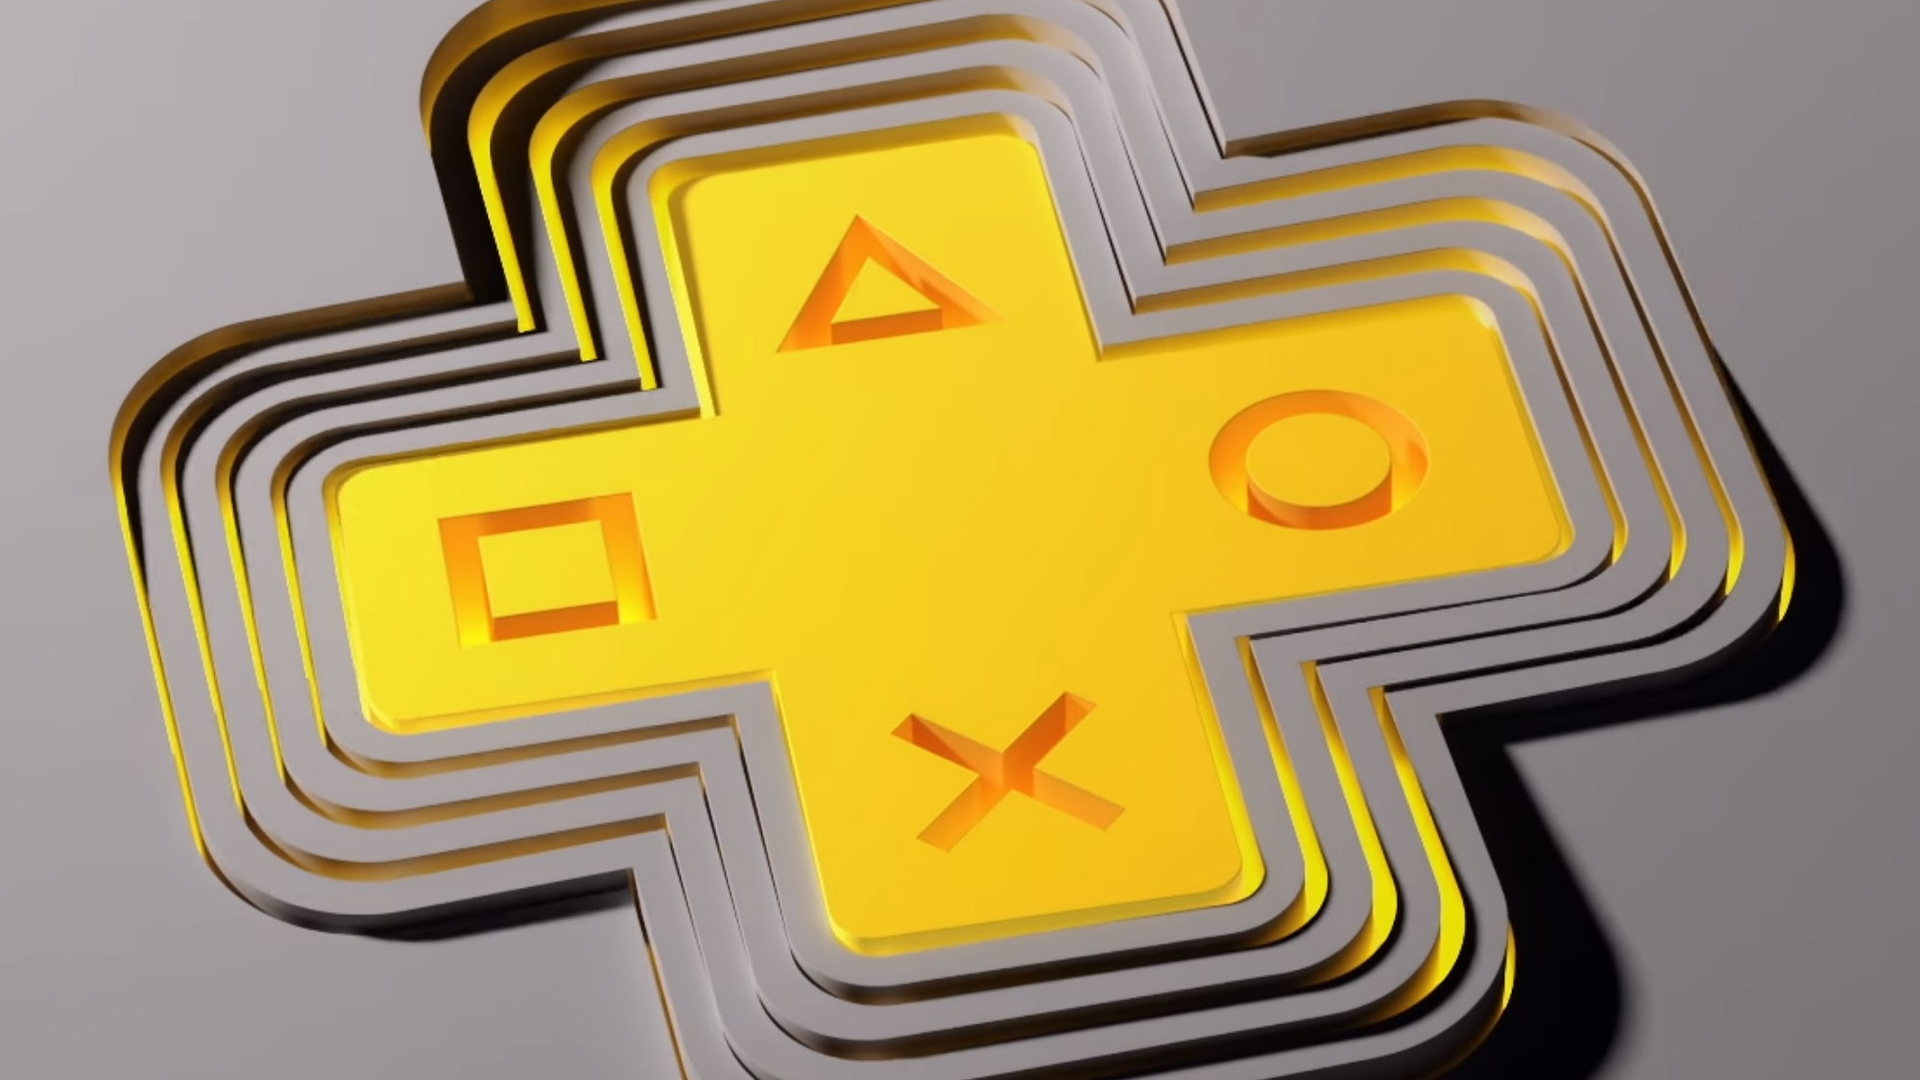 PS Plus Tiers explained details, benefits, and cost TechRadar